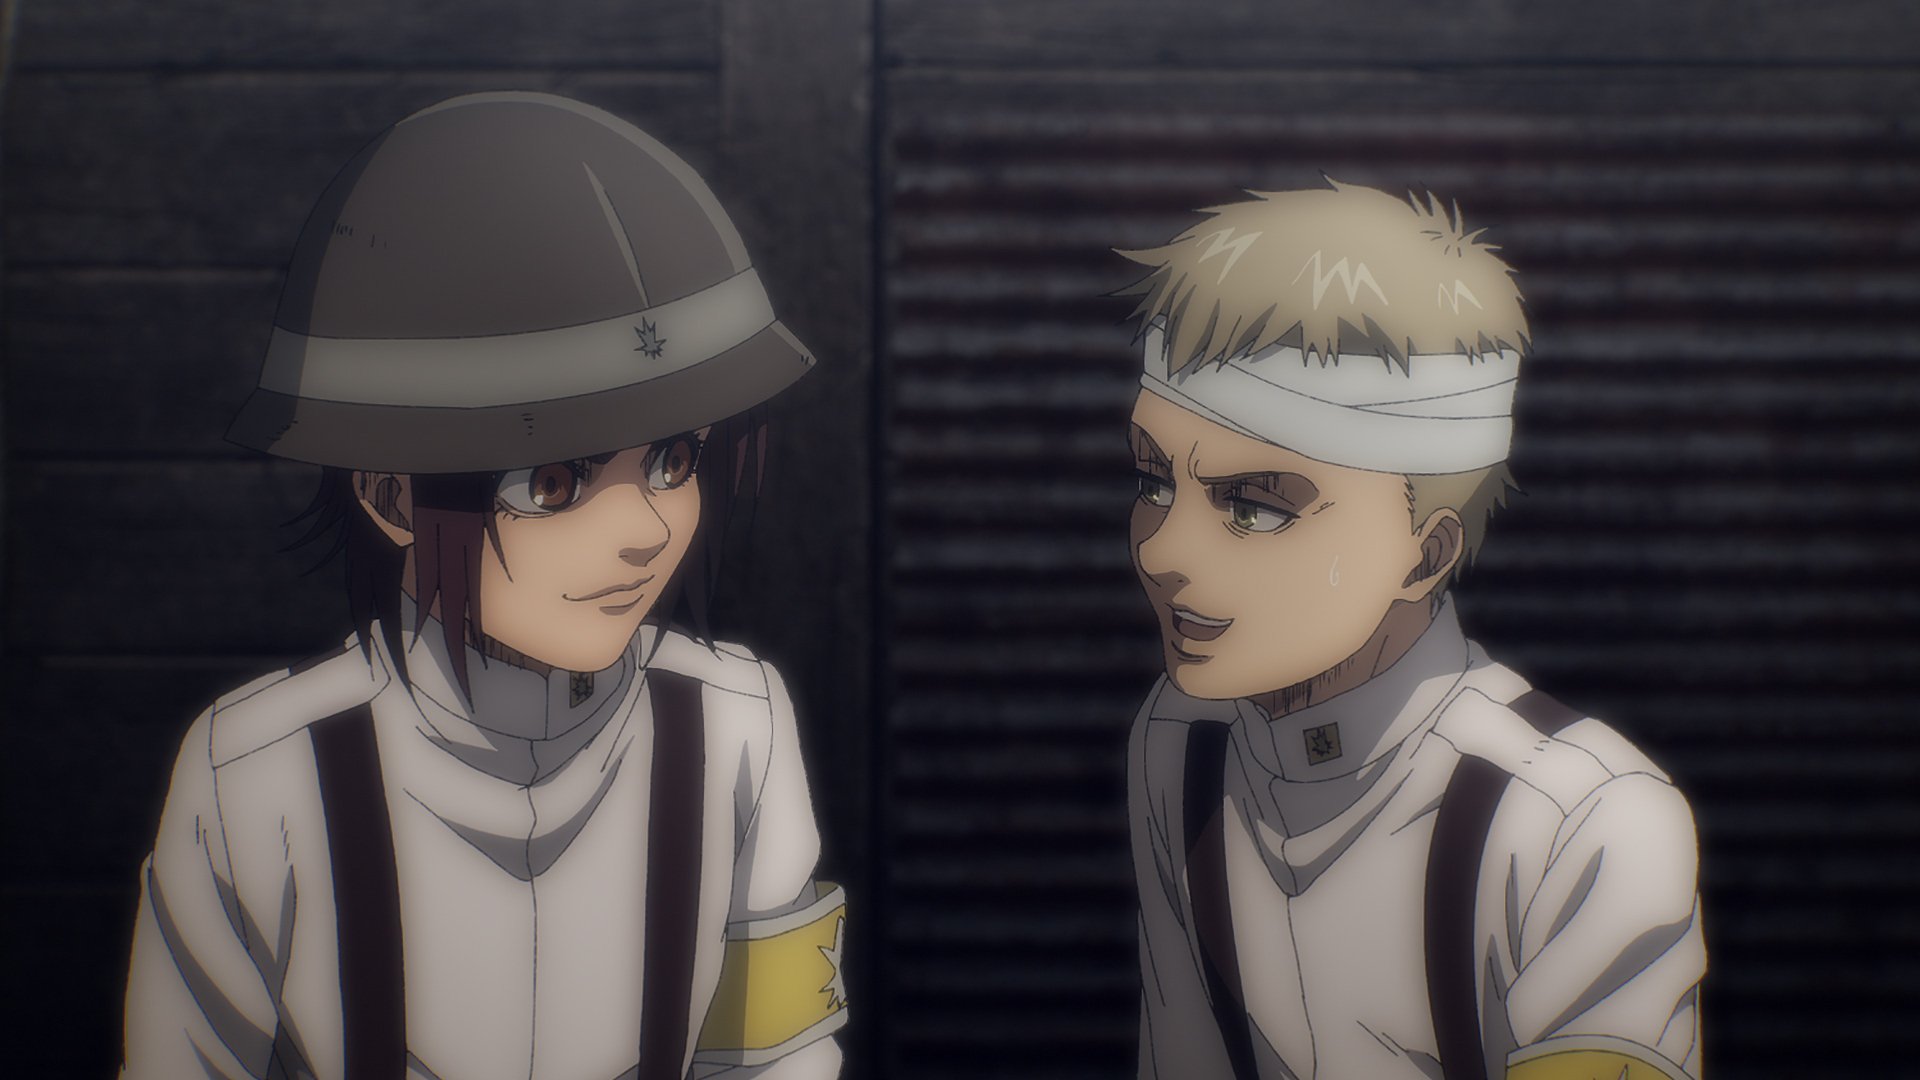 Gabi and Falco in 'Attack on Titan' Season 4 Part 1. They're next to one another in the trenches. They're smiling at each other and Falco's head is bandaged.